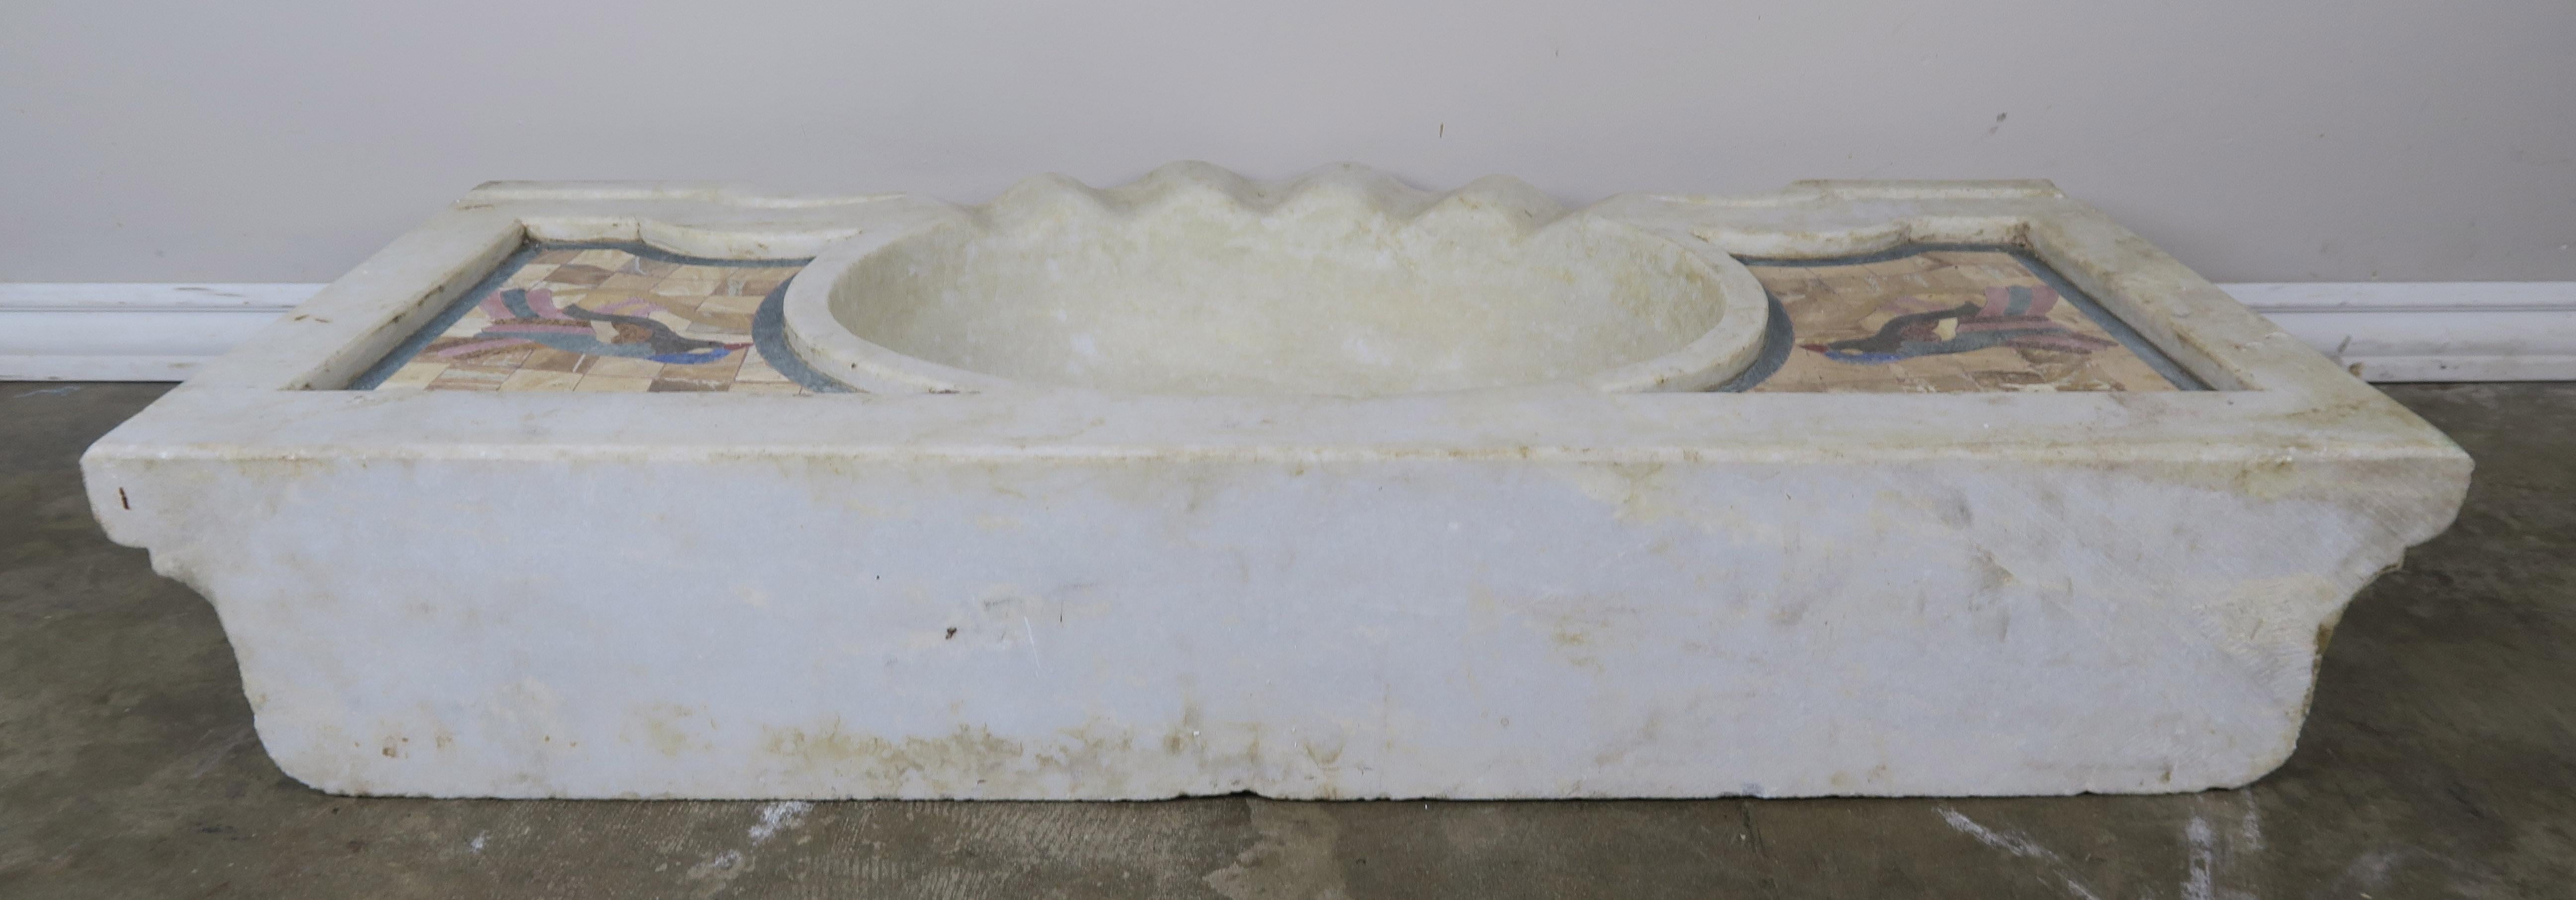 Carrara Marble Sink with Inlaid Stone Birds 4